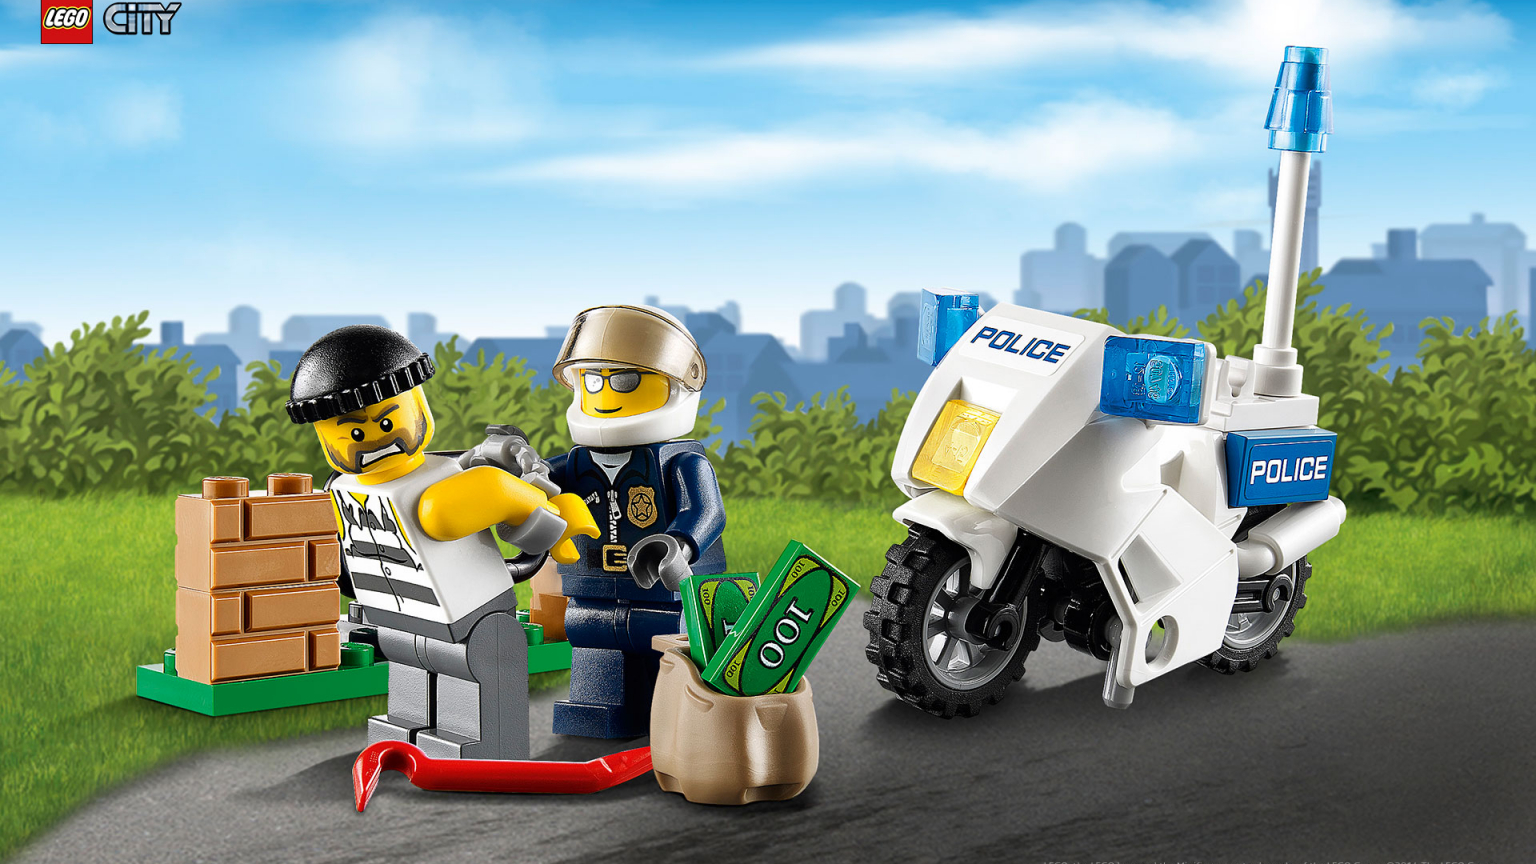 Wallpaper Lego City Police For Your